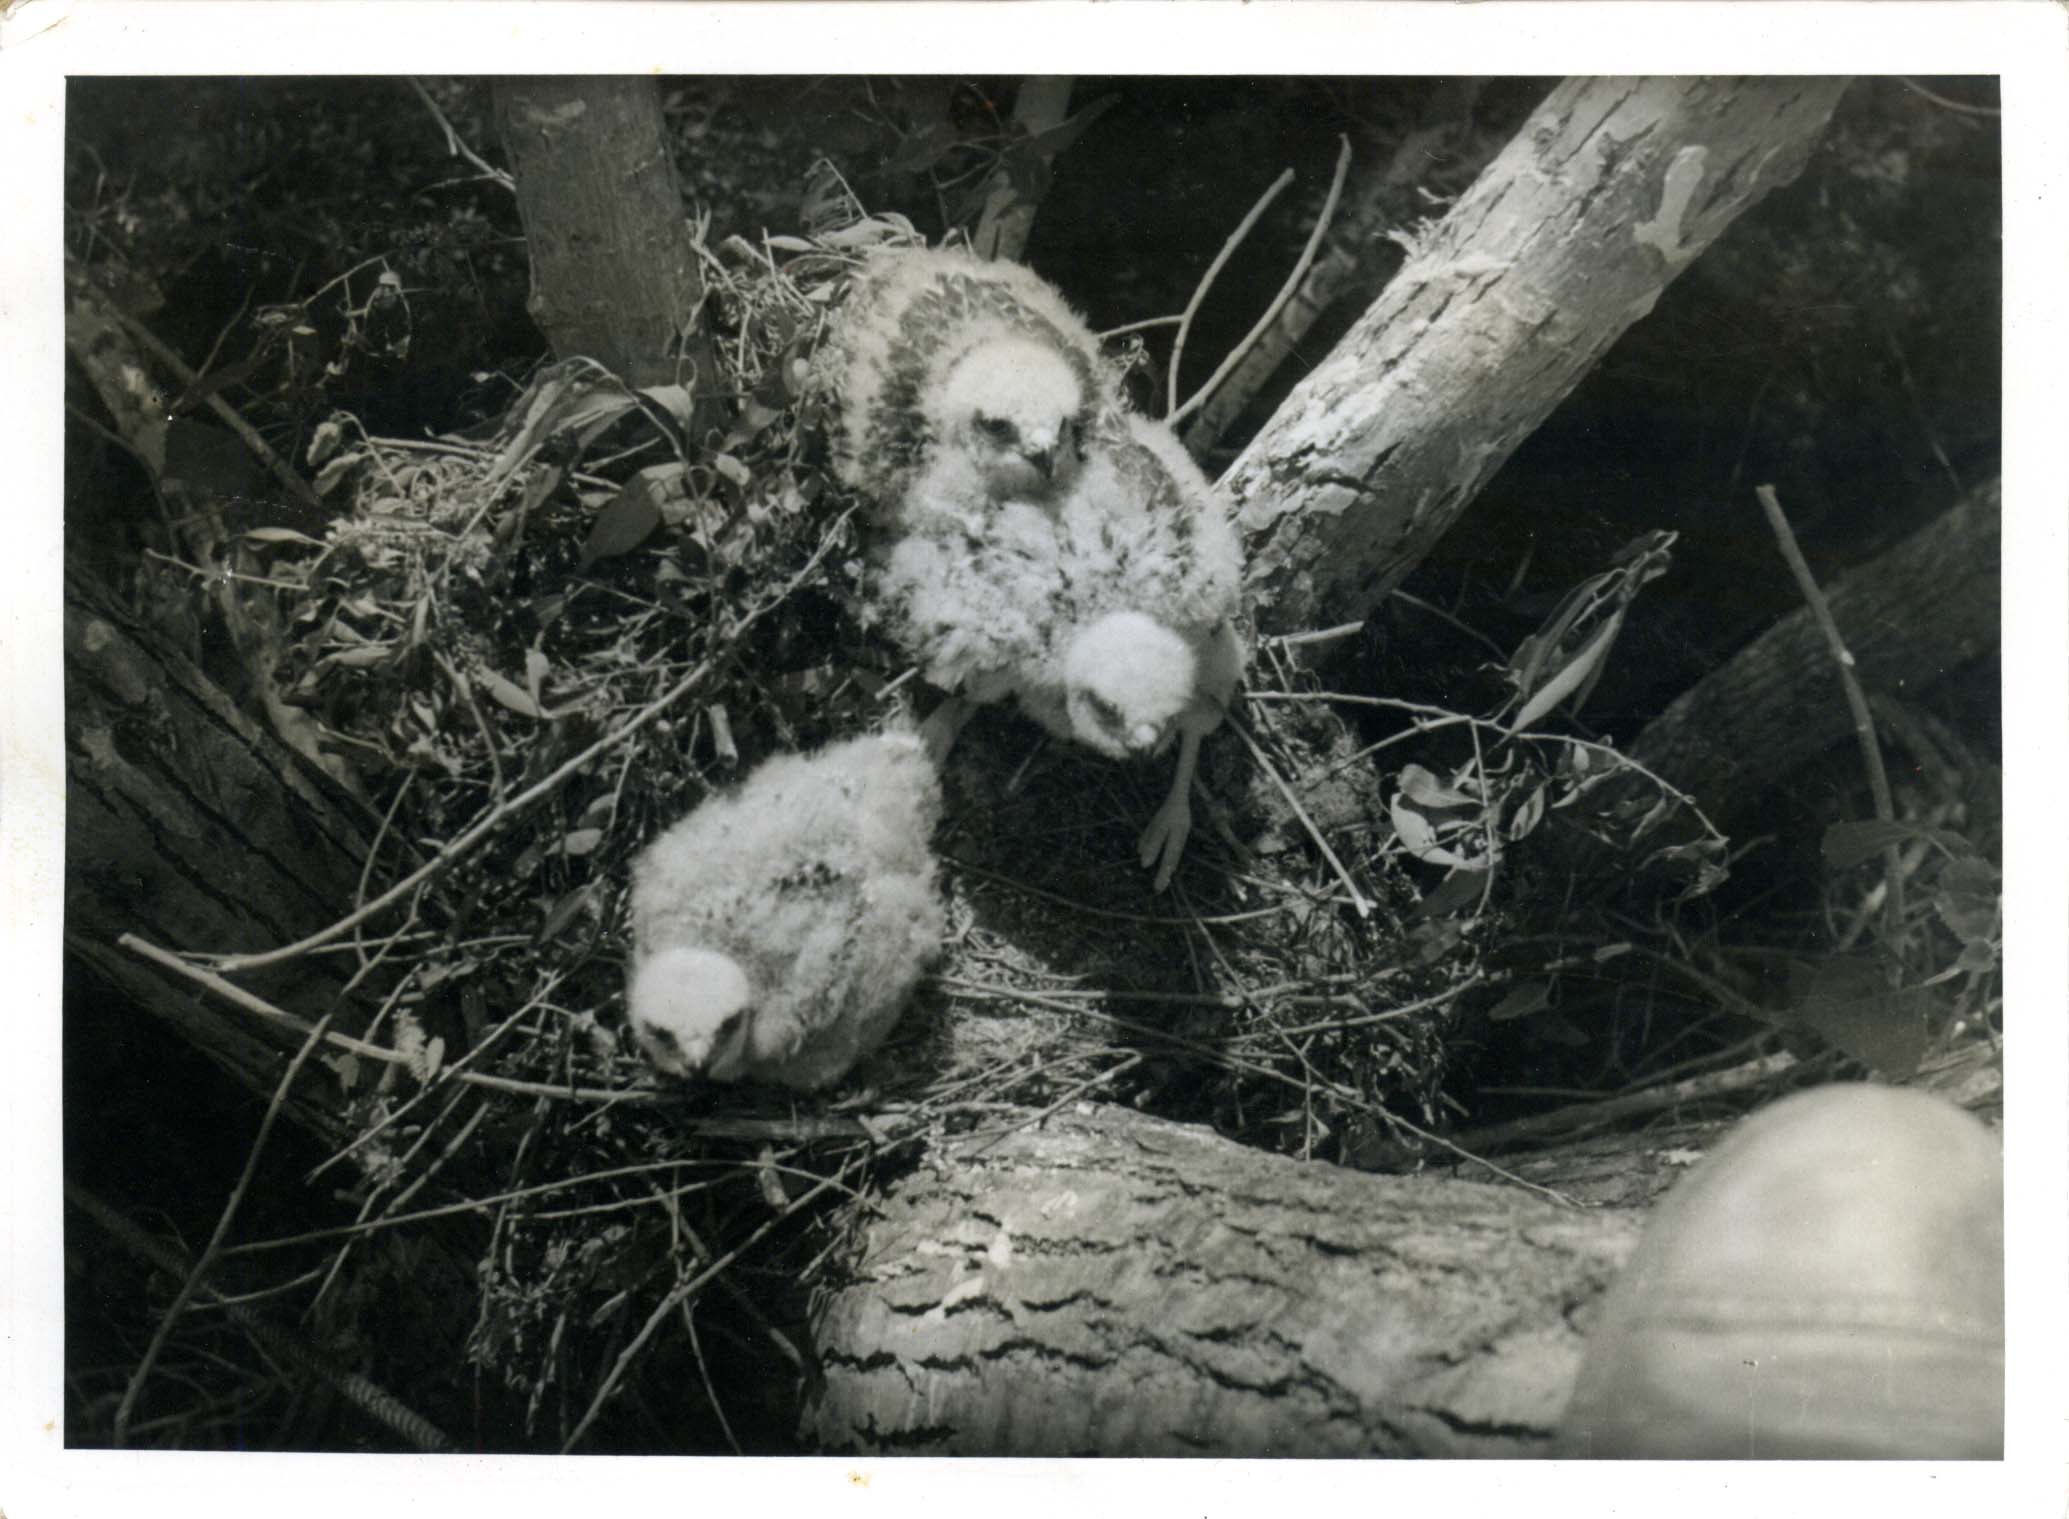 Photograph of three Red-shouldered Hawks in a nest